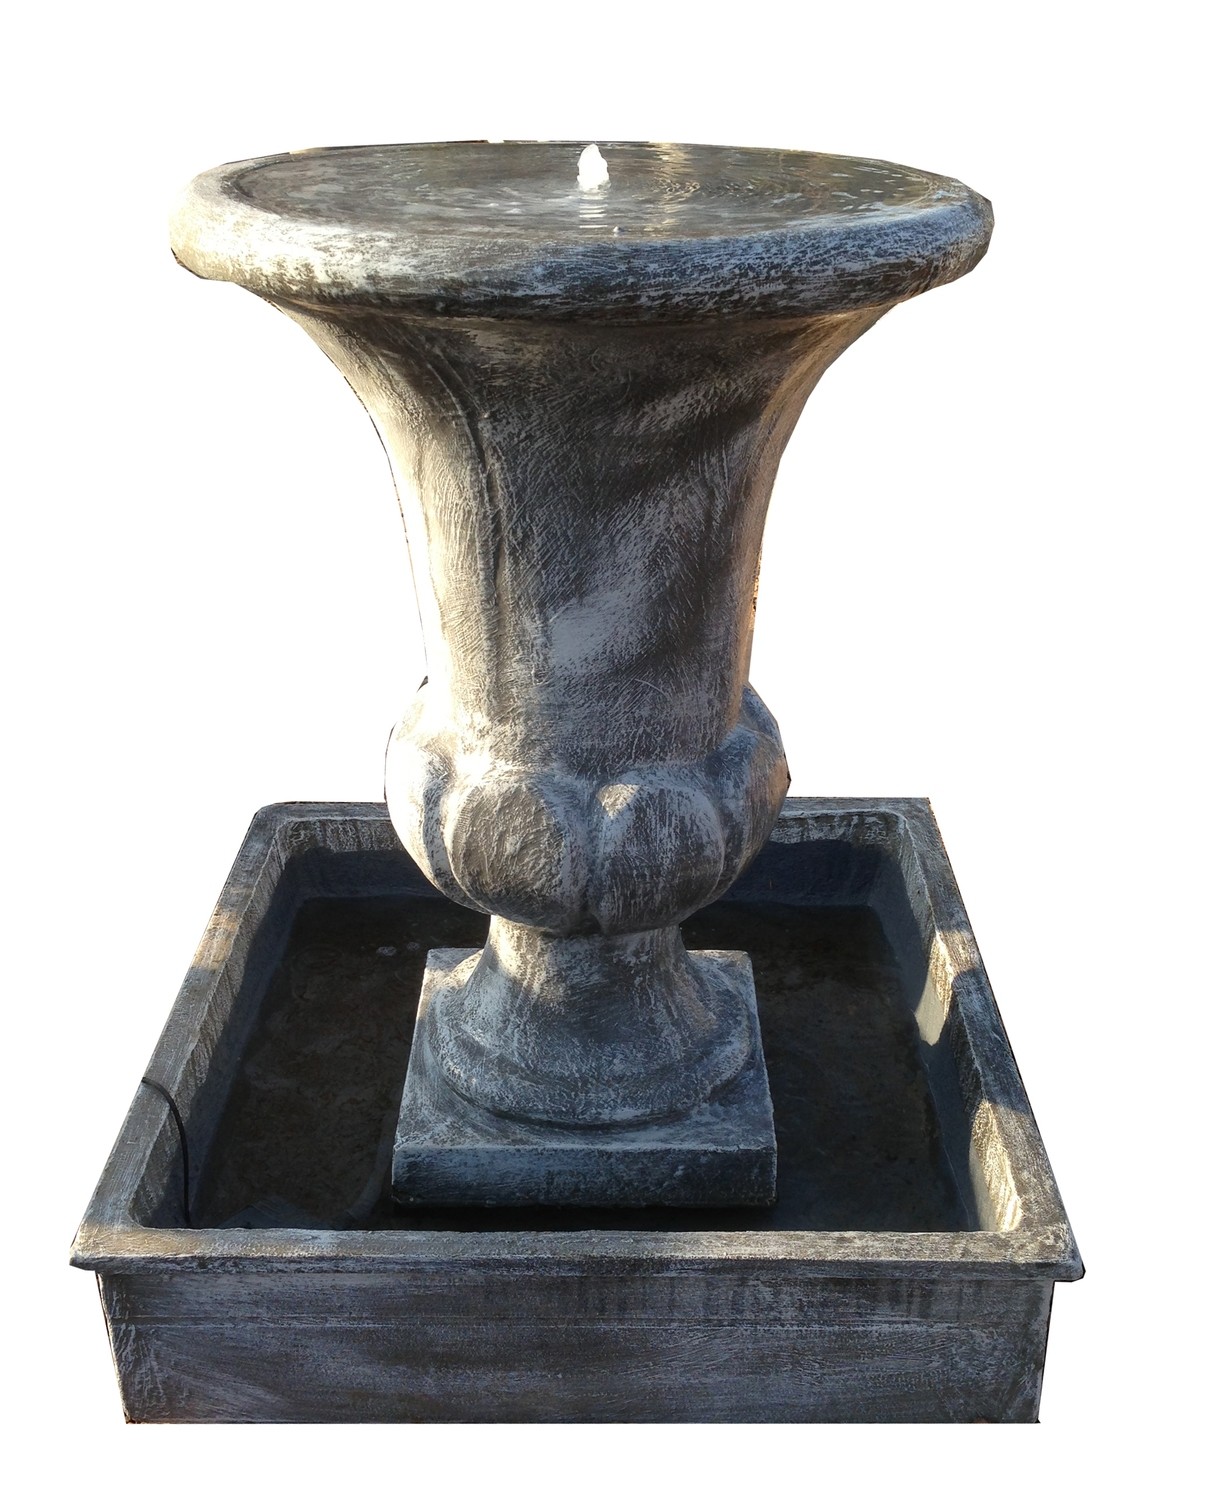 Joshua Urn Lid Fountain with Square Bowl Medium (Excluding Pump)